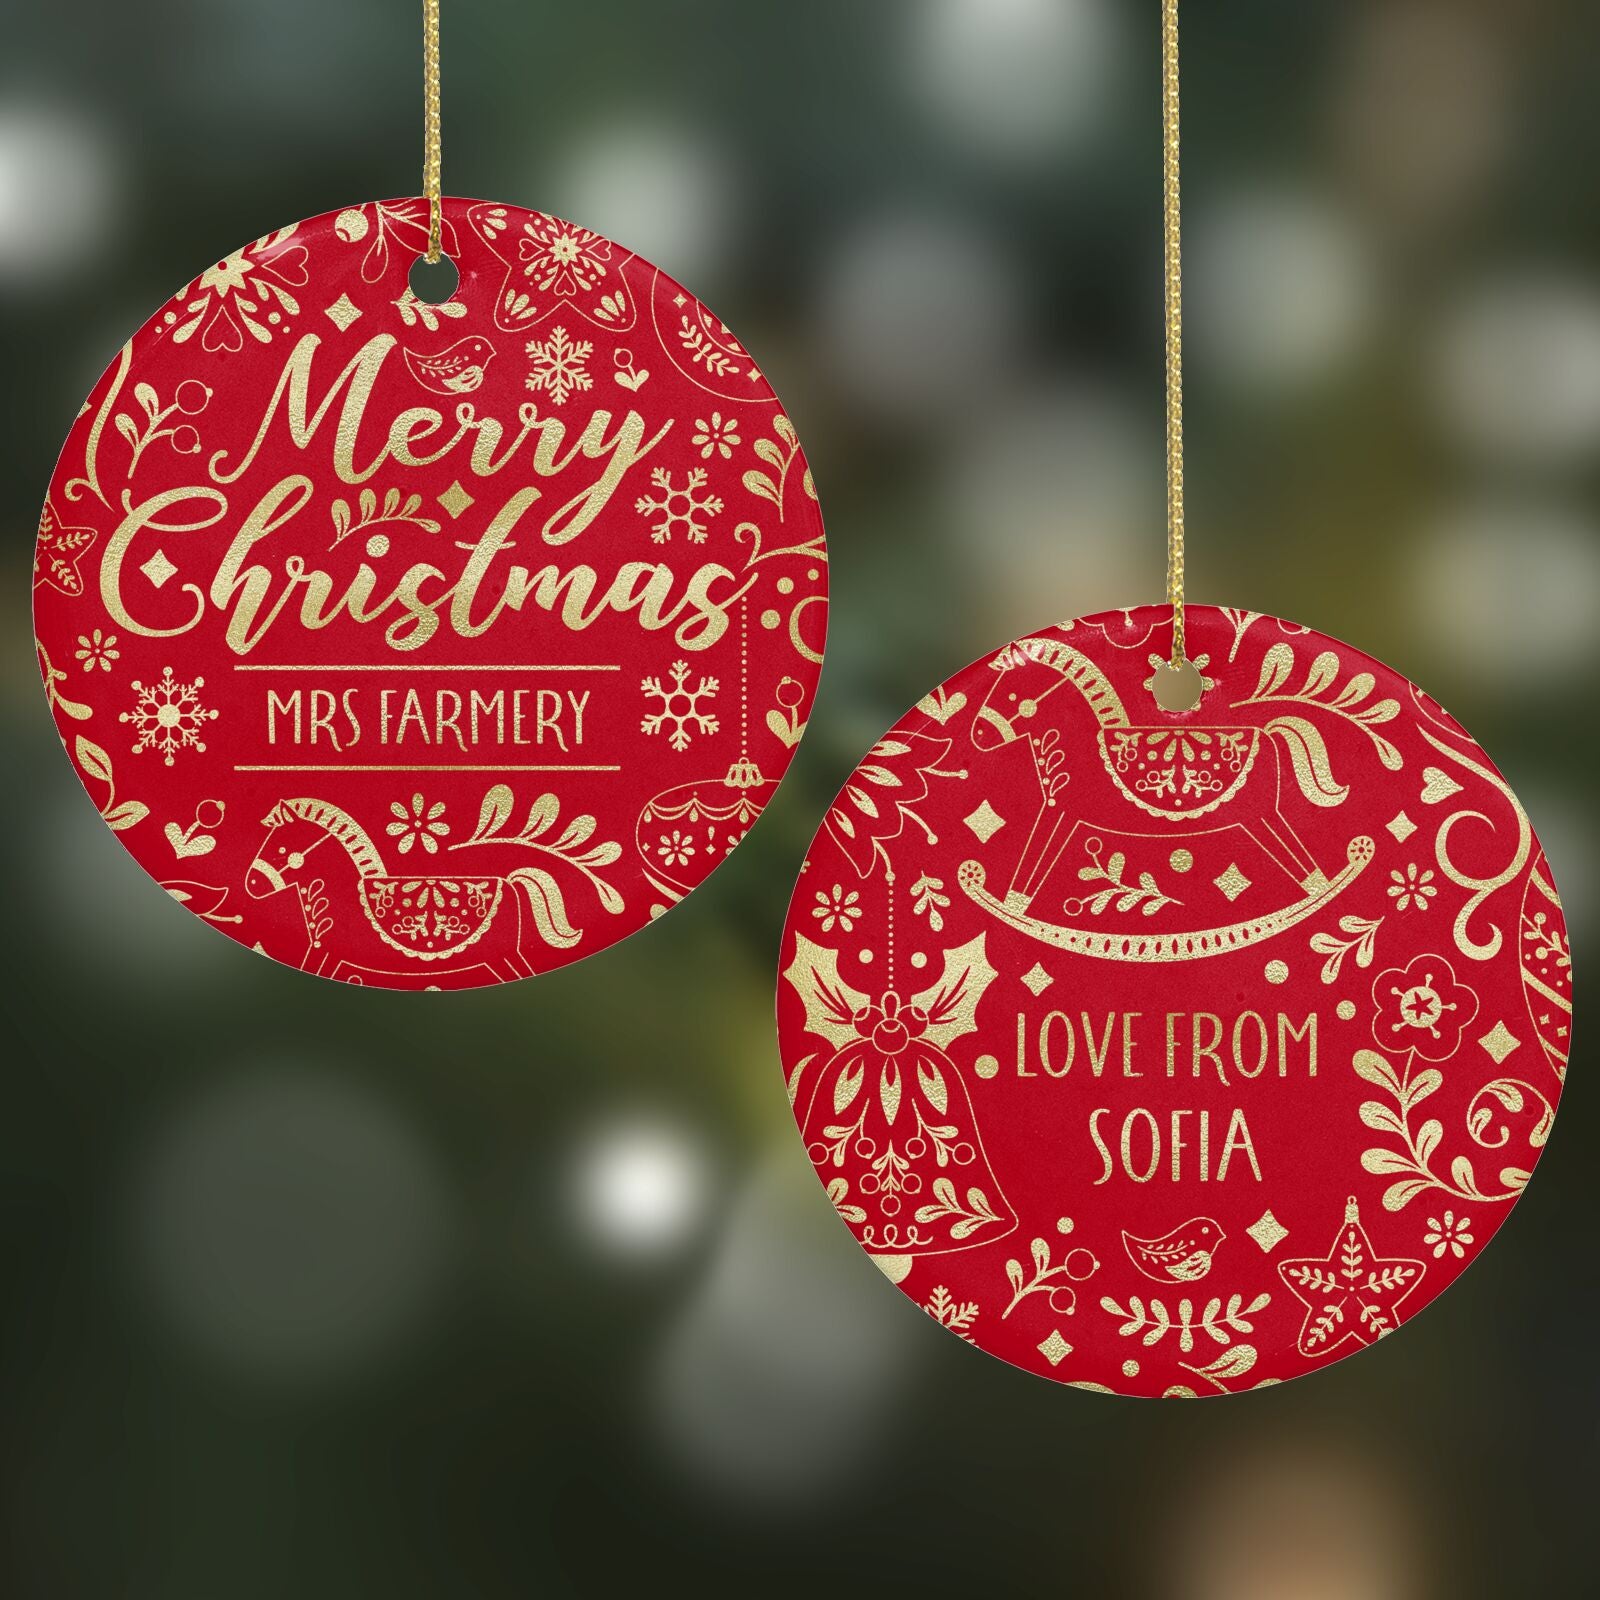 Merry Christmas Teacher Personalised Round Decoration on Christmas Background